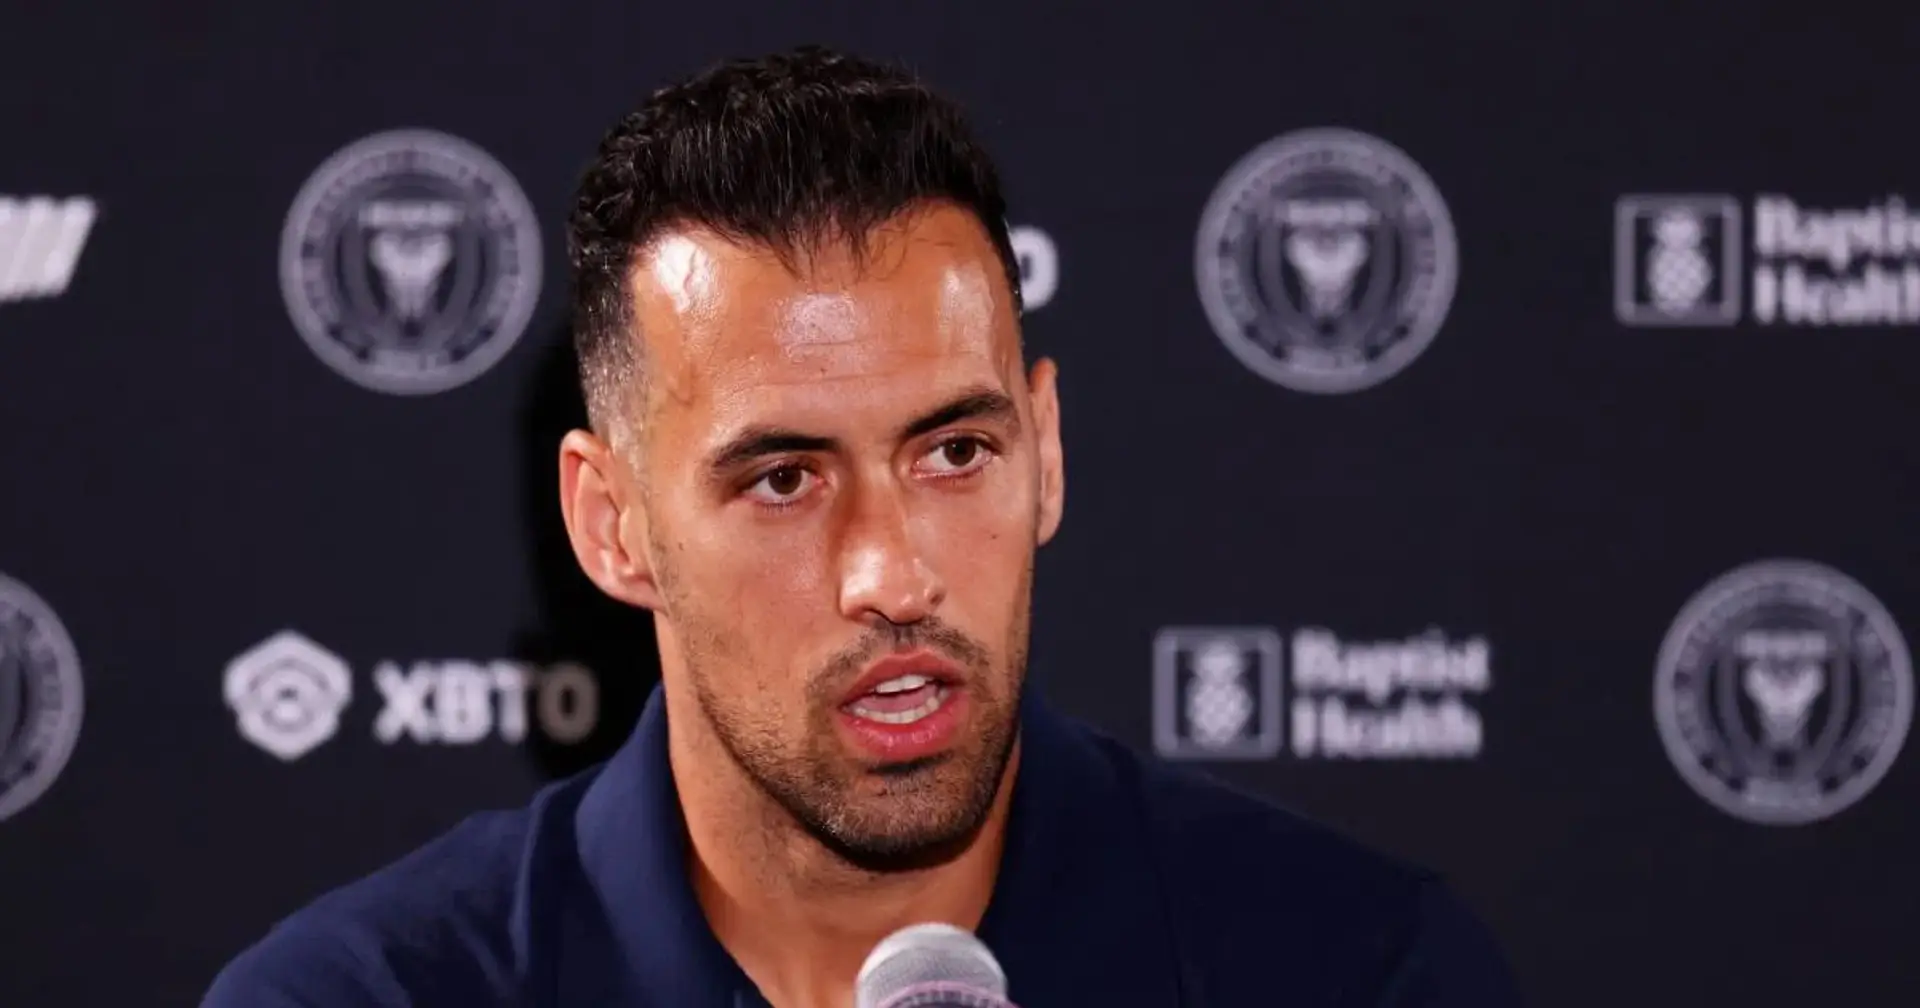 Busquets rejects new Barca contract and 3 other big stories you could have missed